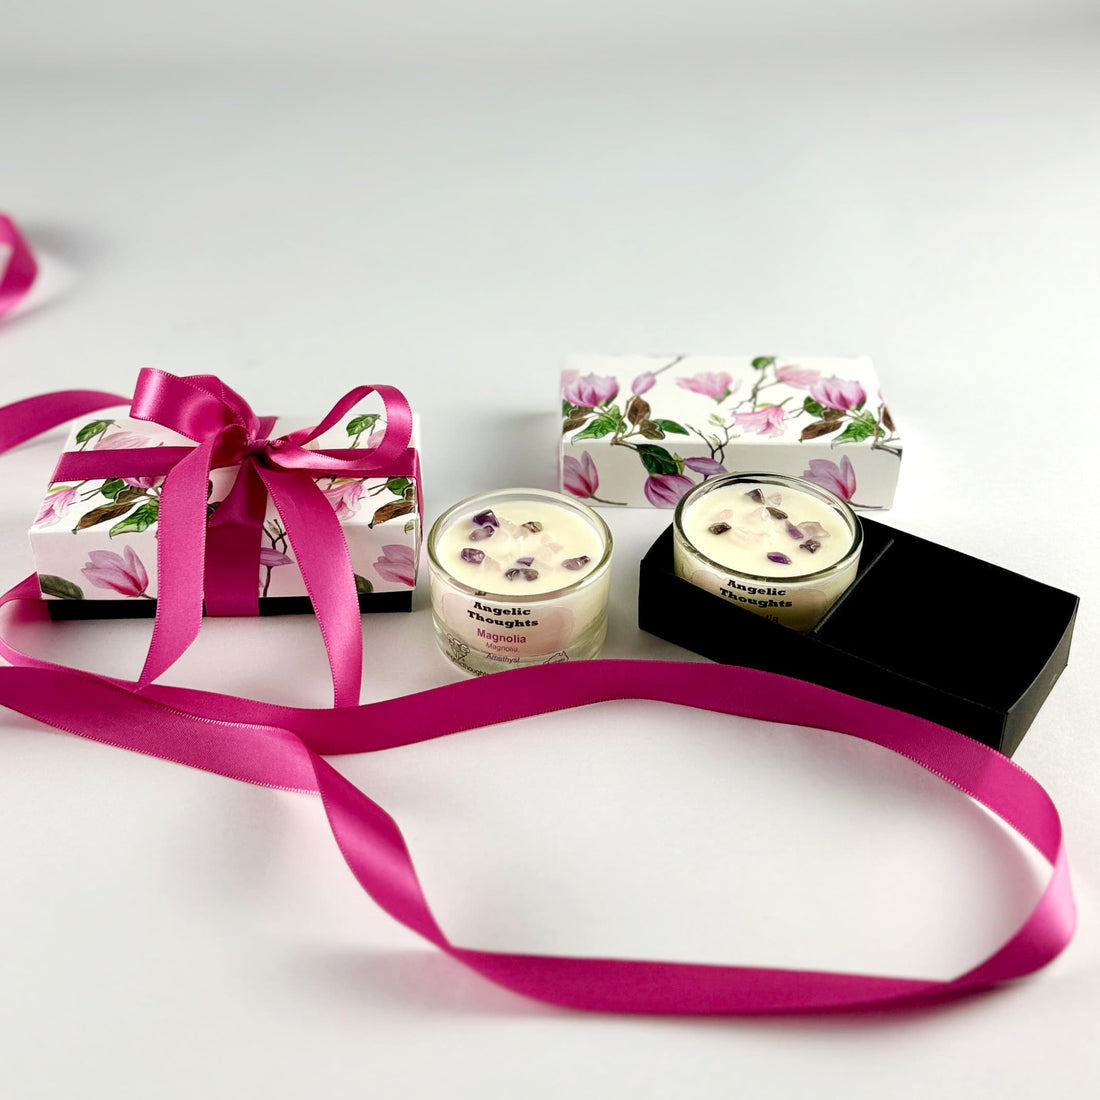 magnolia scented rose quartz and amethyst embellished hand poured tealights in glass tealight containers - one in black base box and one out, with product lid behine and with magnolia 2pack tealight product box tied with deep pink ribbon on the left side